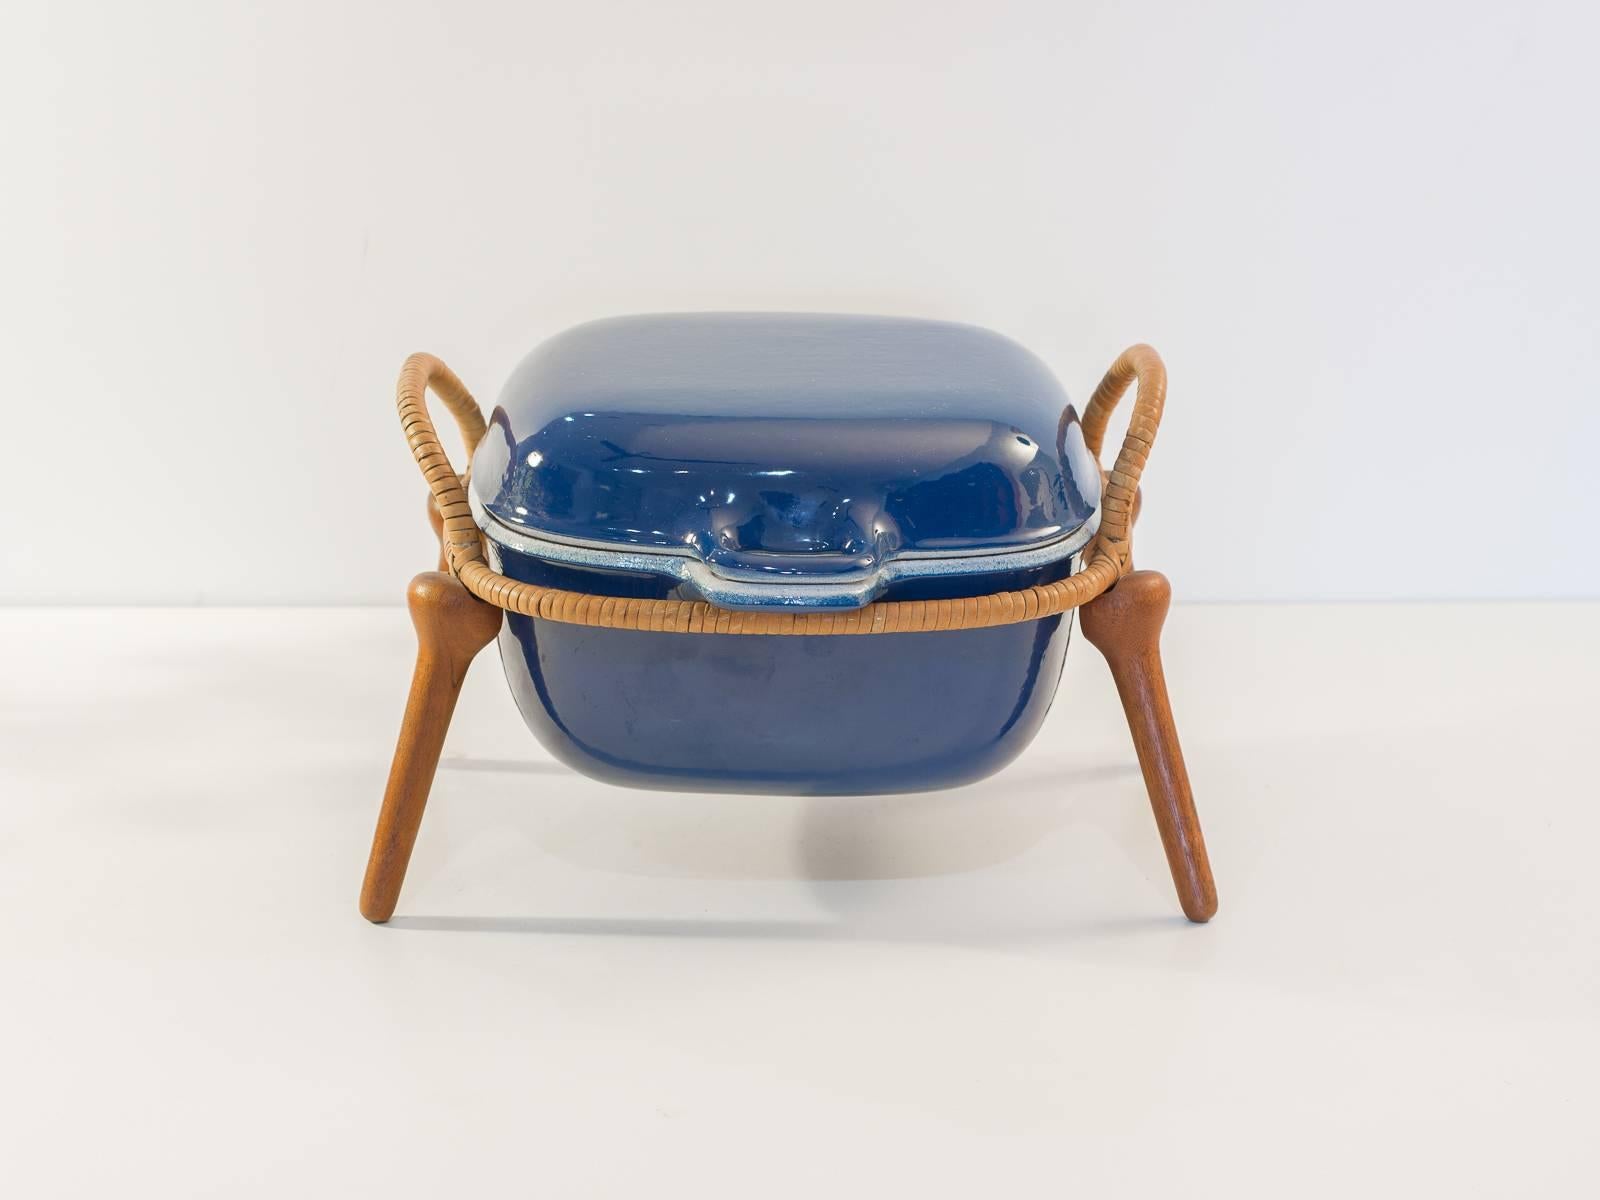 Scarce, 1950s royal blue Dutch oven by Jens Quistgaard for IHQ. In gleaming, never-been-used condition. This stylish, yet hefty cookware is fully coated in enamel inside and out, which makes it naturally non-stick when treated and cleaned properly.